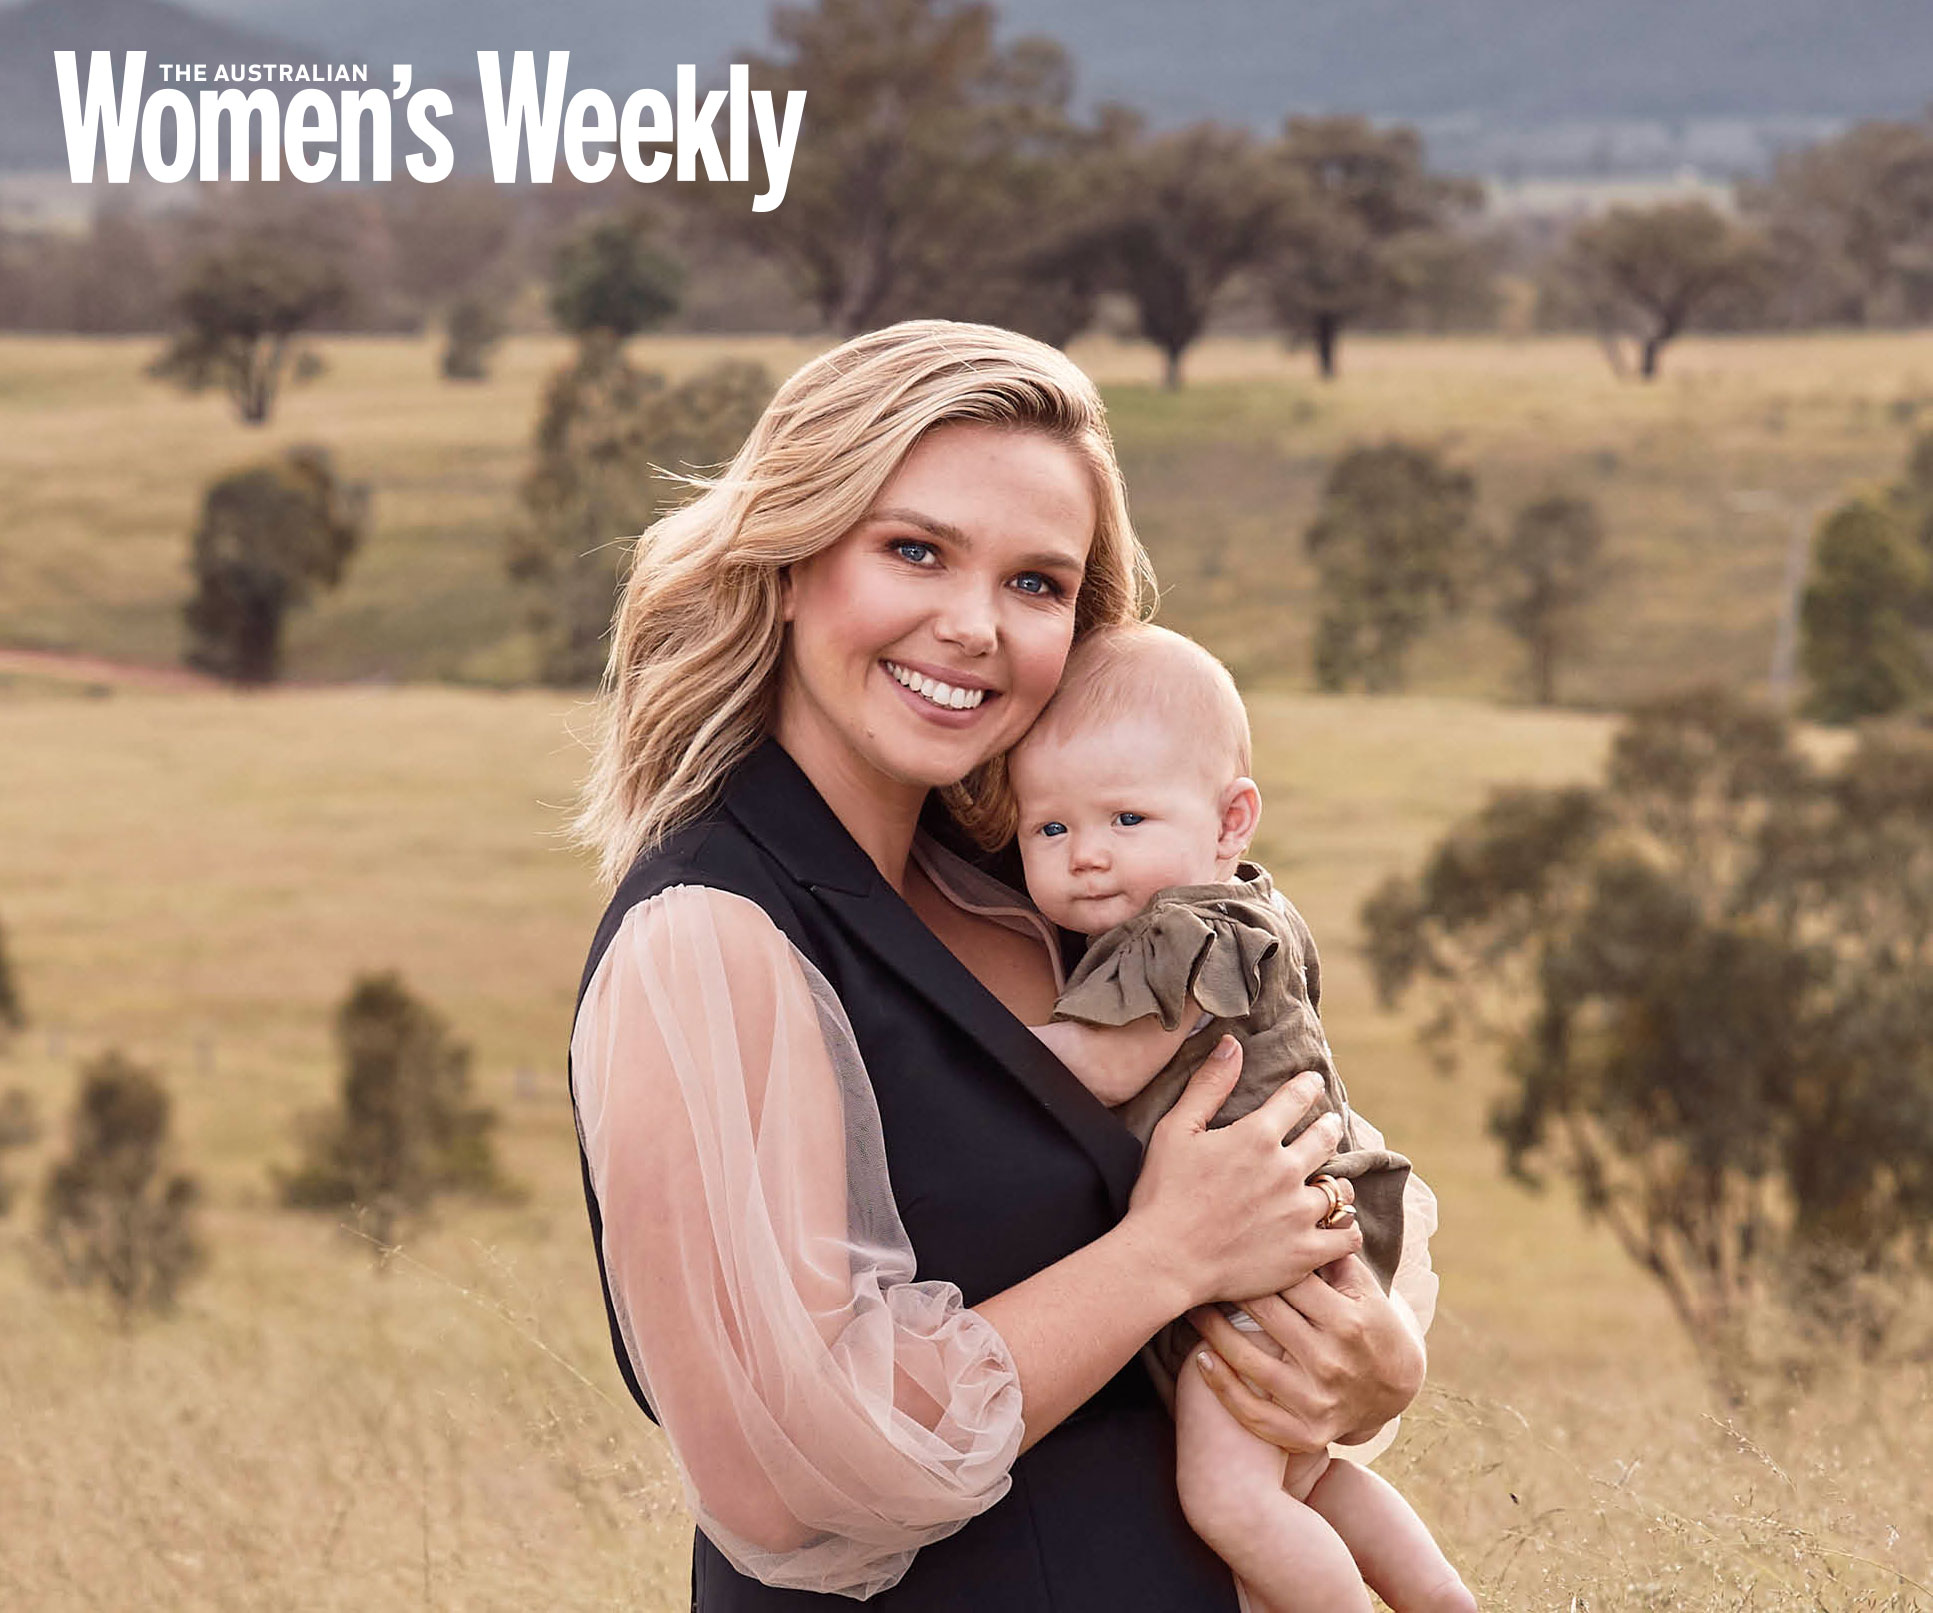 EXCLUSIVE: Sunrise’s Edwina Bartholomew on self-isolating with a newborn and wanting her daughter to grow into a “kick-arse female”